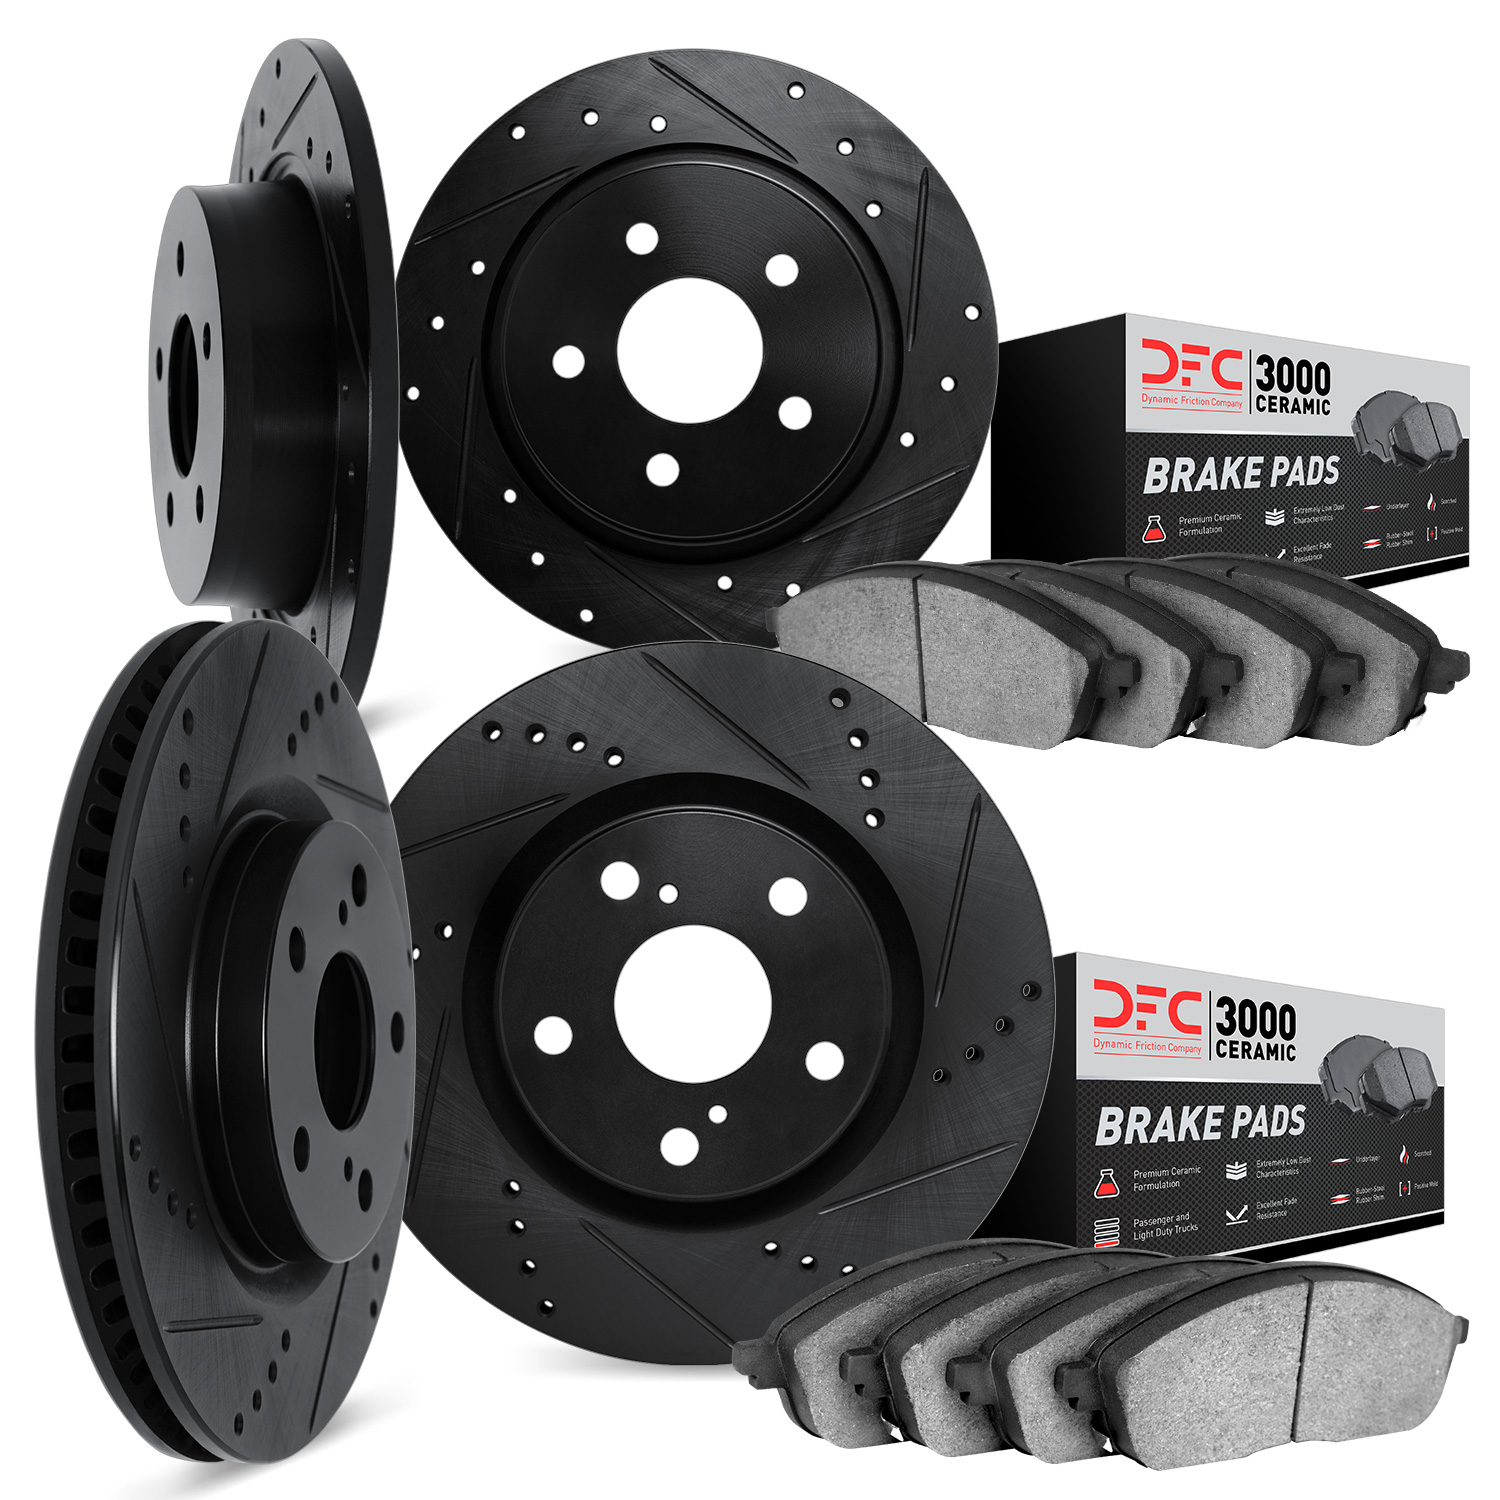 8304-27047 Drilled/Slotted Brake Rotors with 3000-Series Ceramic Brake Pads Kit [Black], 1998-2000 Volvo, Position: Front and Re